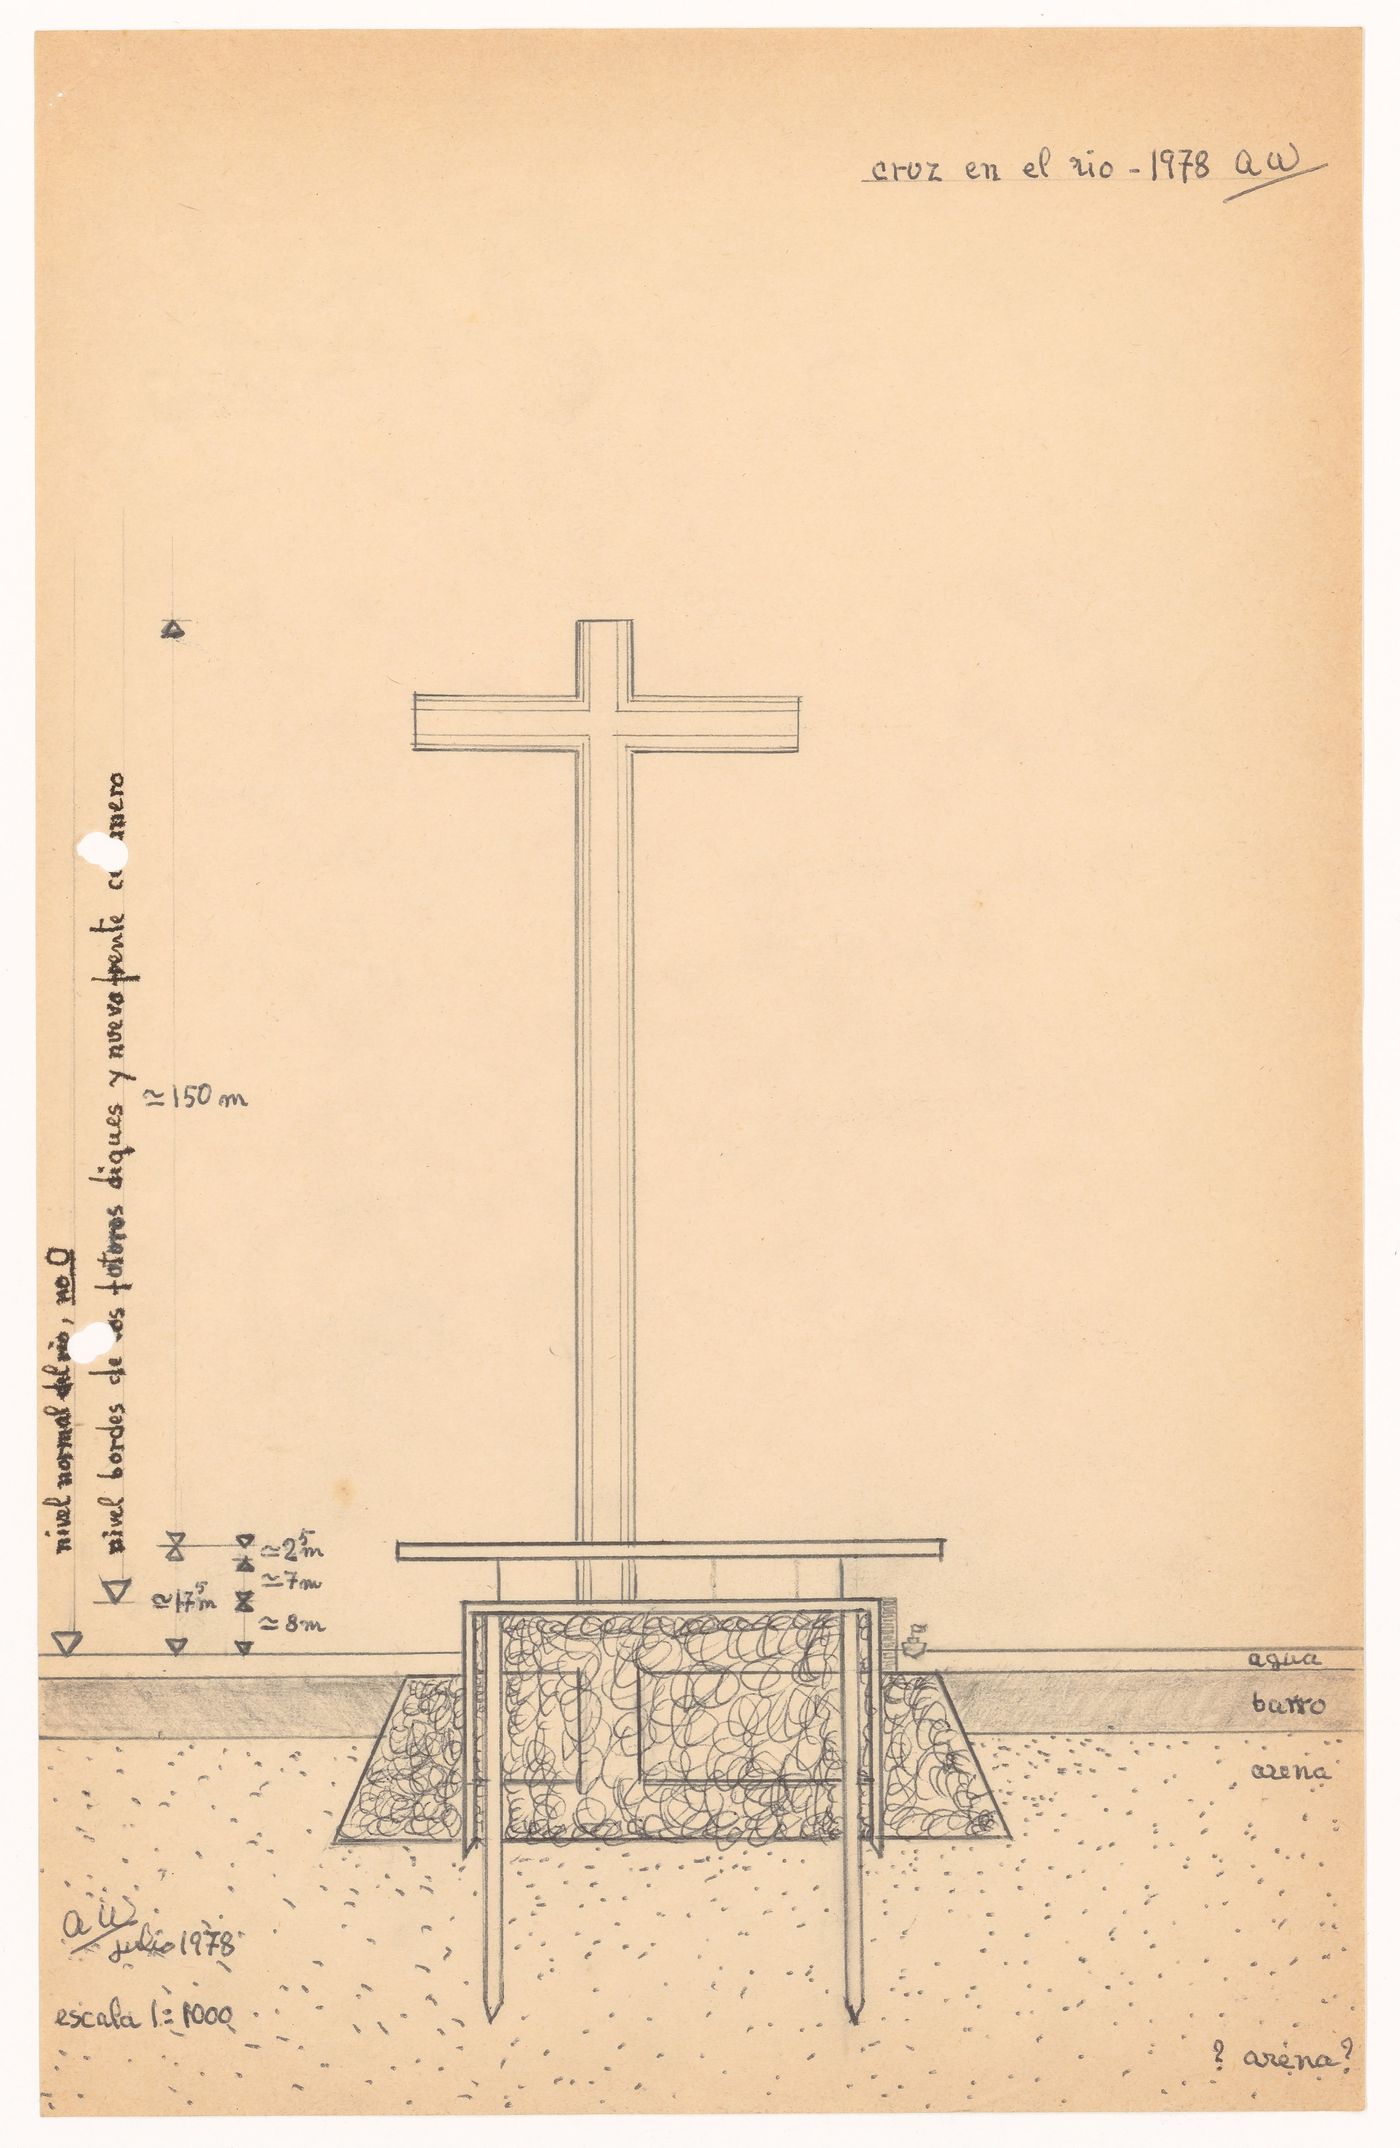 Section showing the ground anchoring with sketches and notes for Cruz en el Rio de la Plata, Buenos Aires, Argentina